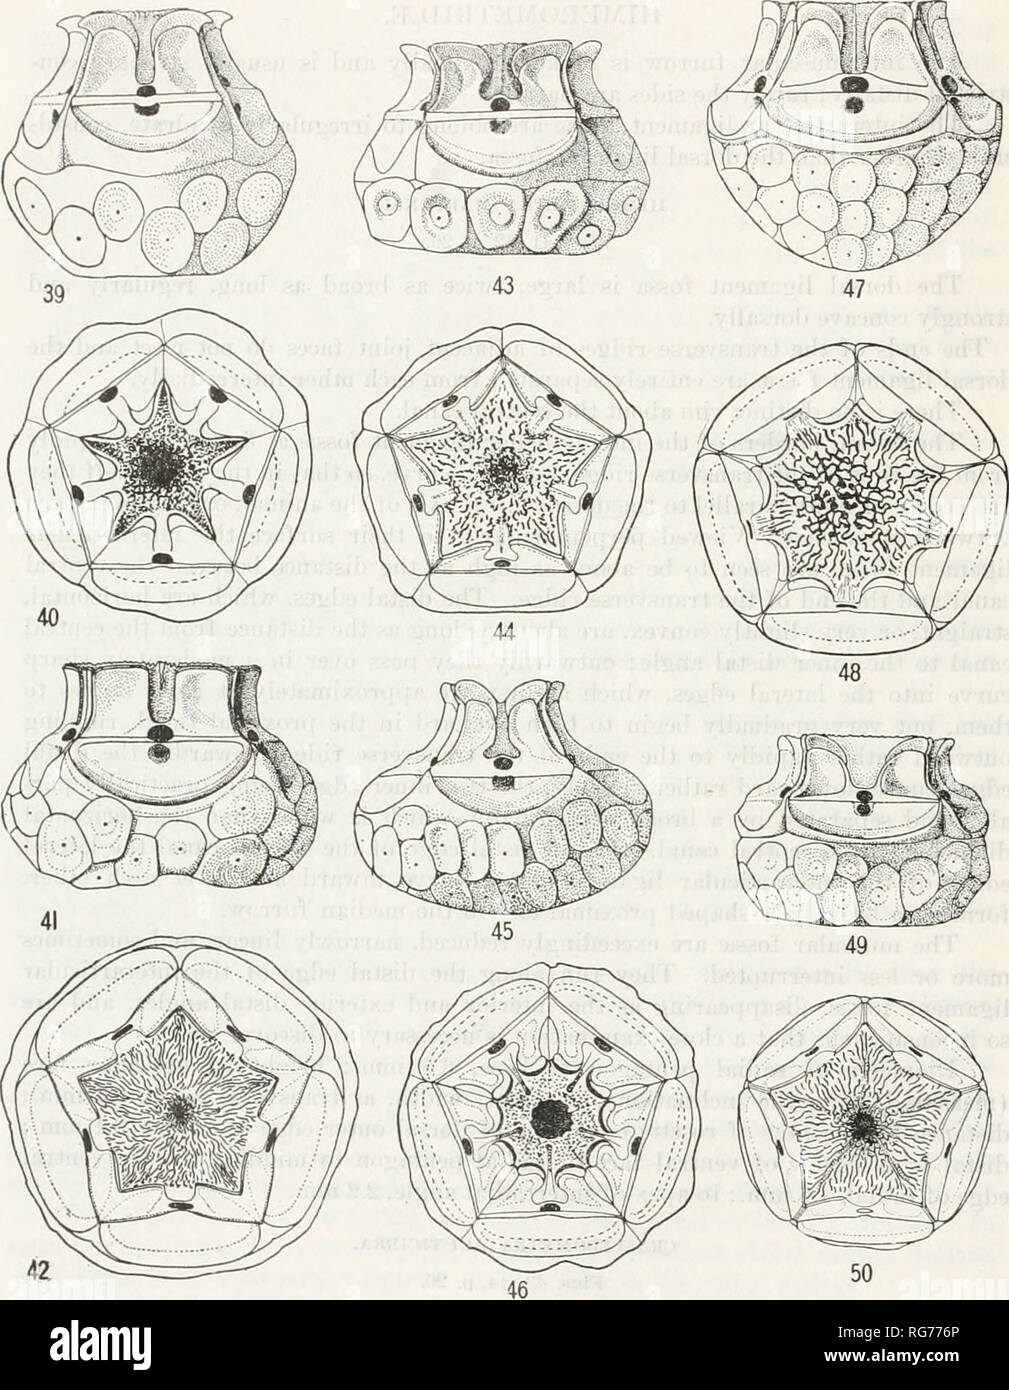 . Bulletin - United States National Museum. Science. 26 BULLETIjS' 82, UNITED STATES NATIONAL MUSEUM.. Has. 39-50.—Radial Pextagoxs of various Comatumds. :«&gt;. Amphimetra ensifer, lateral view of RADIALS AND CENTRODORSAL. 40. SAME, VENTRAL VIEW OP RADIAL PE.XTAGON. 41. HiMEROMETRA MAR- TENSI, LATERAL VIEW OF RADIALS AND CENTRODORSAL. 42. SAME, VENTRAL VIEW OP R.iDIAL PENTAGON 4.5. CRASPEDO.METRA ACUTICIRRA, LATERAL VIEW OF RADIALS AND CENTRADORSAL. 44. SAME, VENTR VL VIEW OP RADIAL PENTAGON. 45. HETEROMETRA BEY.XAIDII, LATERAL VIEW OF RADIALS AND CENTUADORSU. 46 SAME VENTRAL VIEW OF RADIAL P Stock Photo